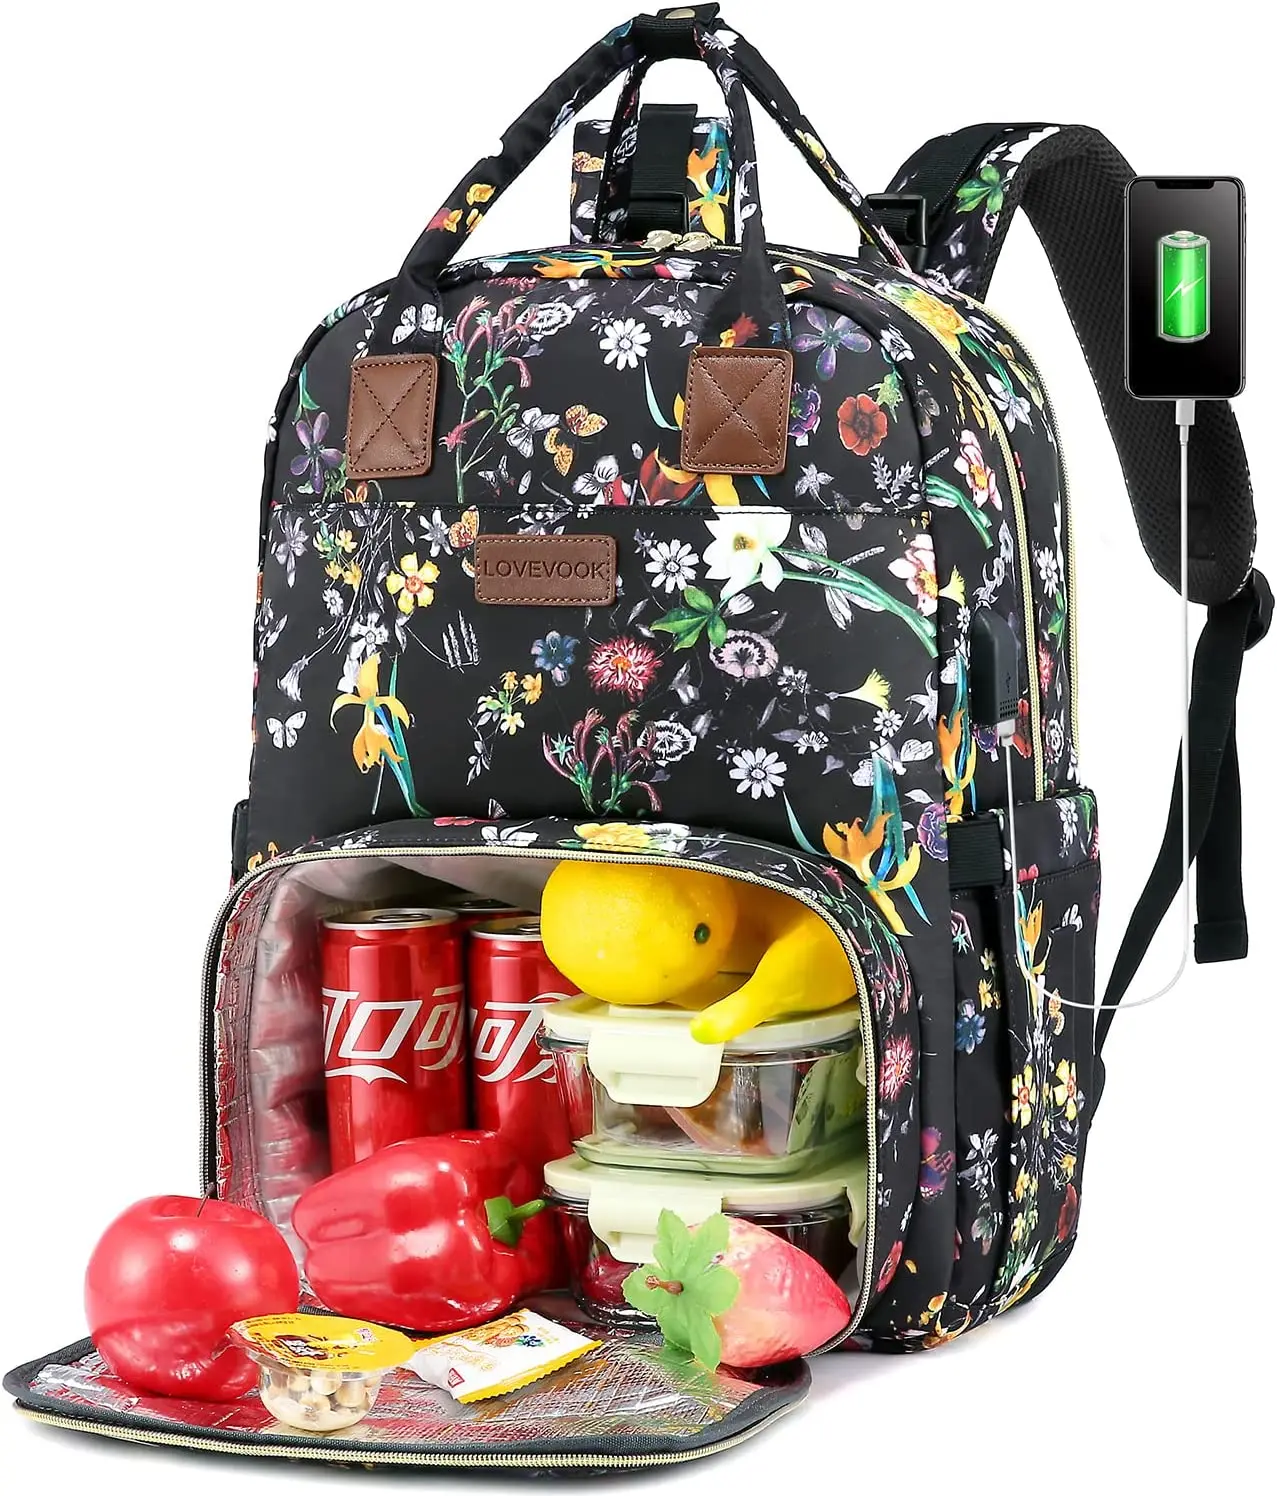 

LOVEVOOK fashion printing Insulated Cooler Backpack Vintage Work School Lunch bags travel 15.6 14inch women laptop backpacks